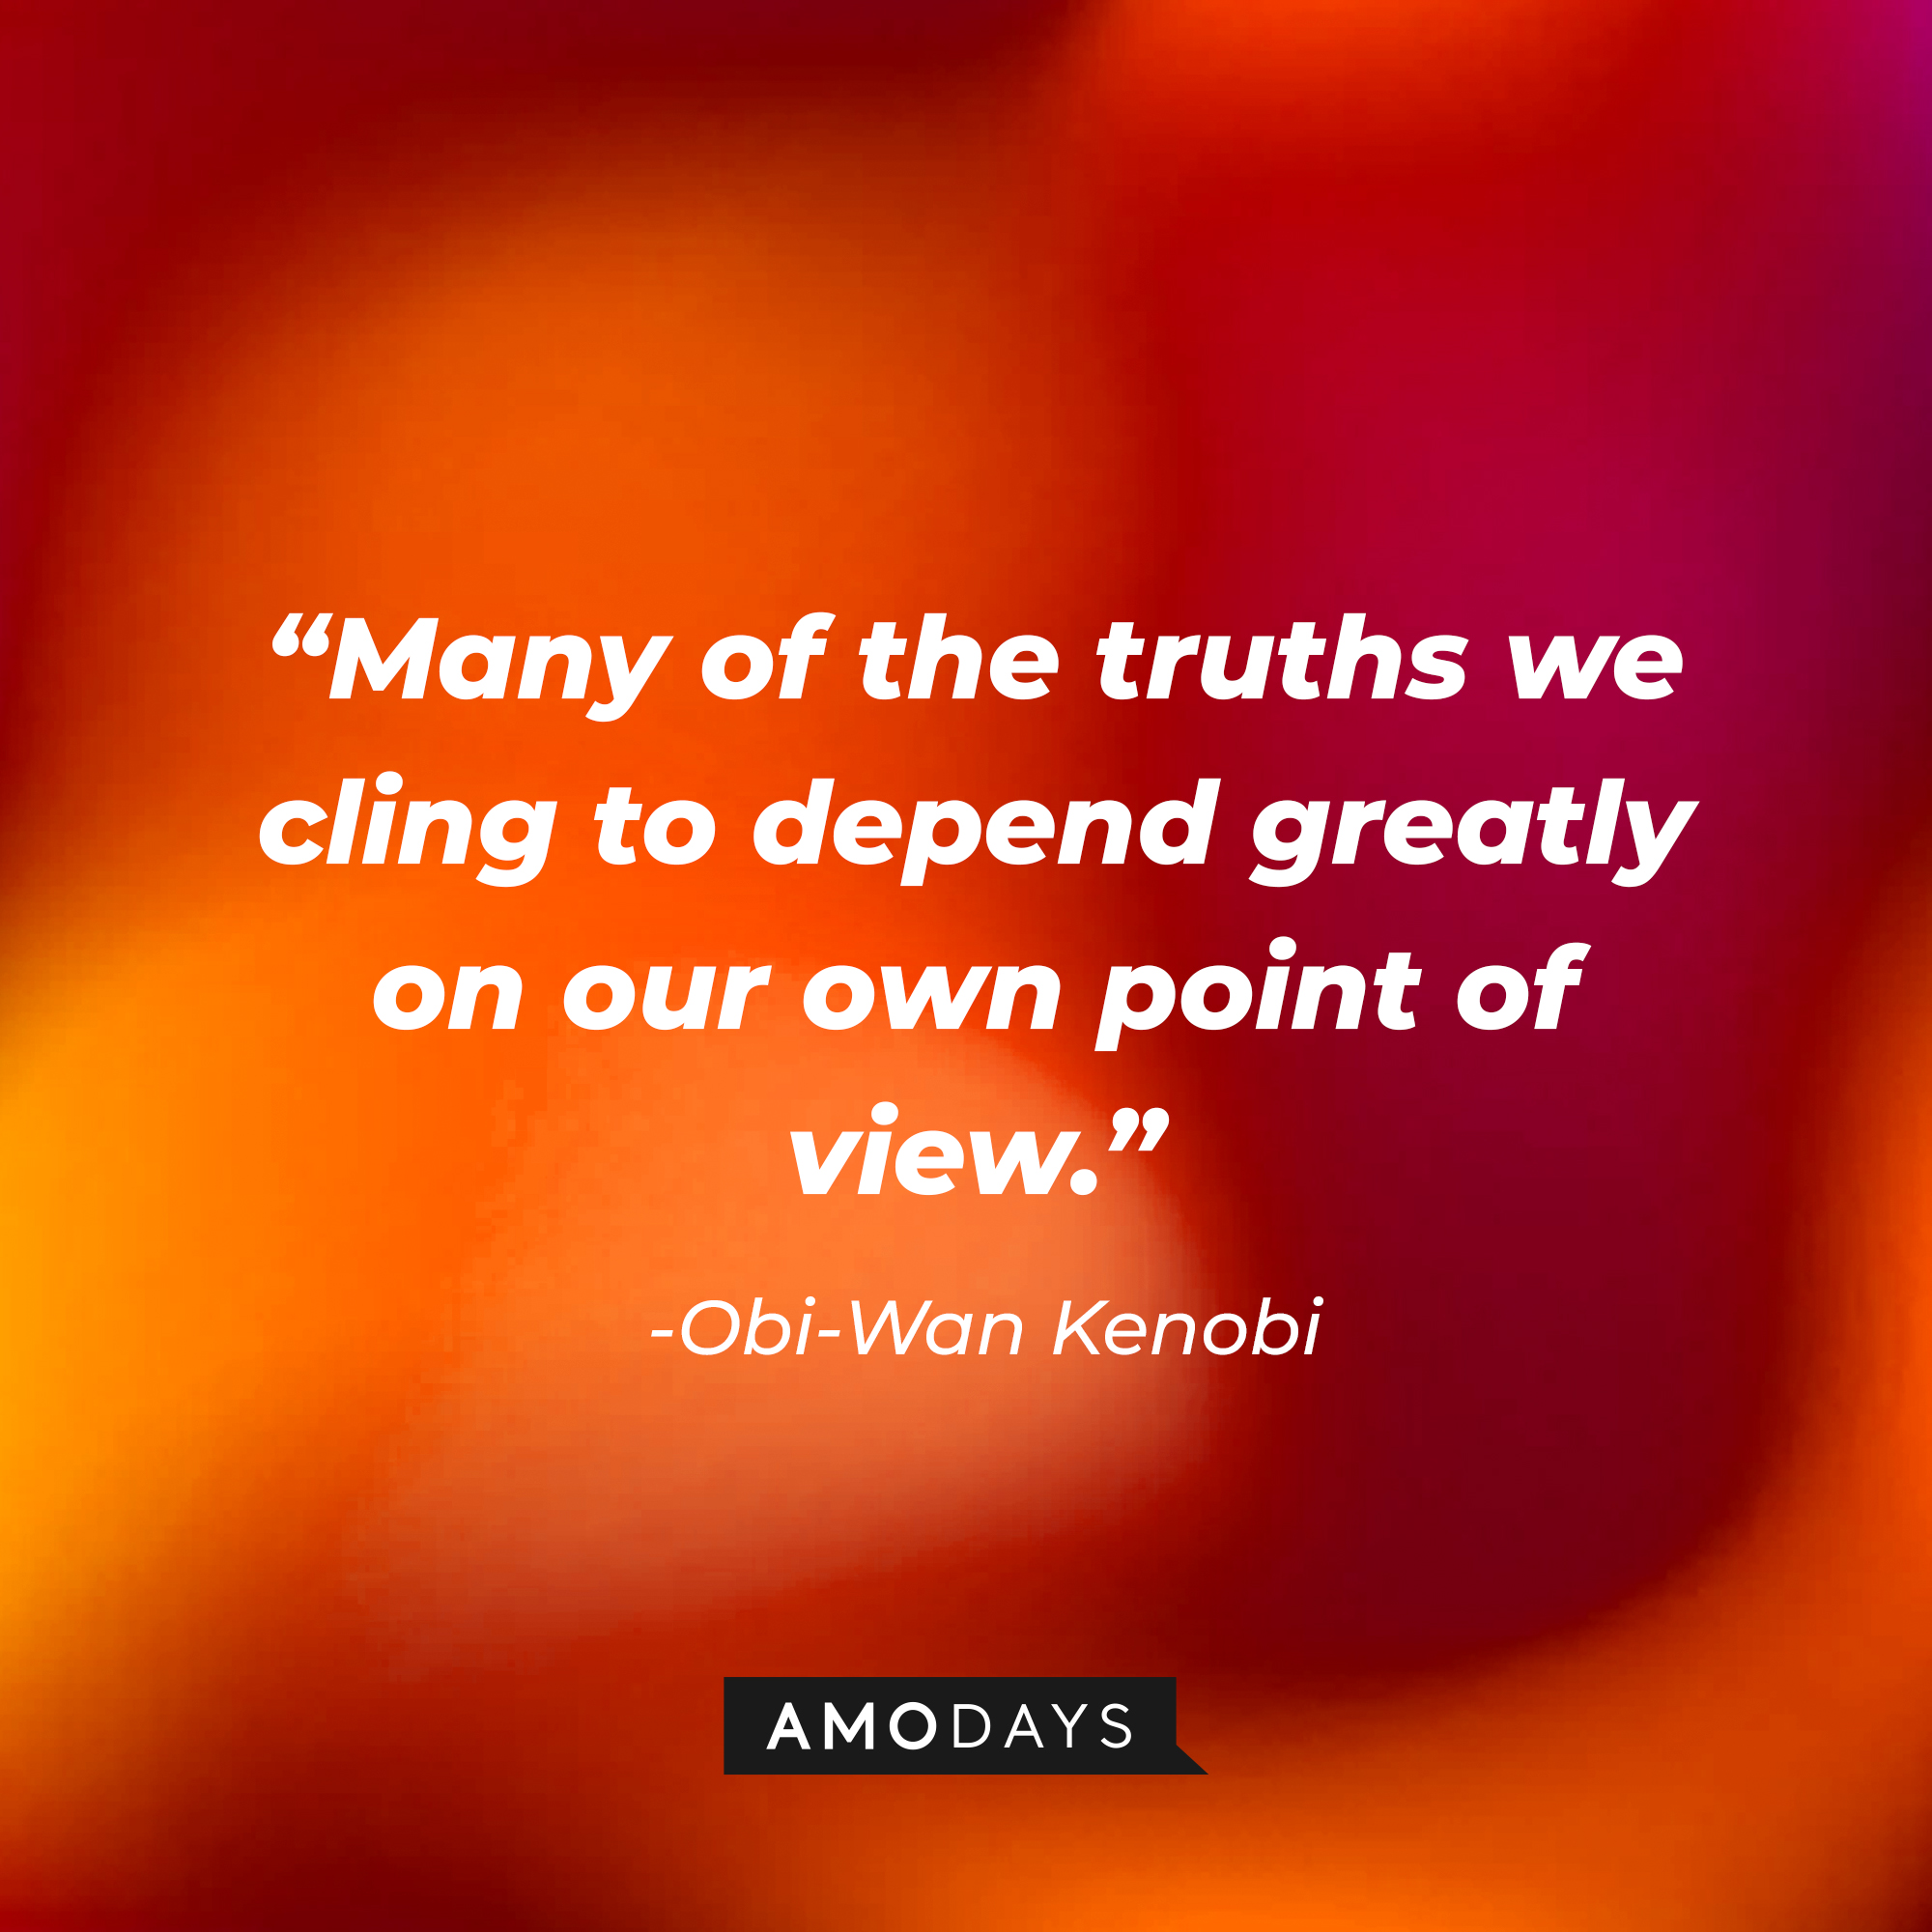 Obi-Wan Kenobi’s quote: “Many of the truths we cling to depend greatly on our own point of view.” | Source: AmoDays